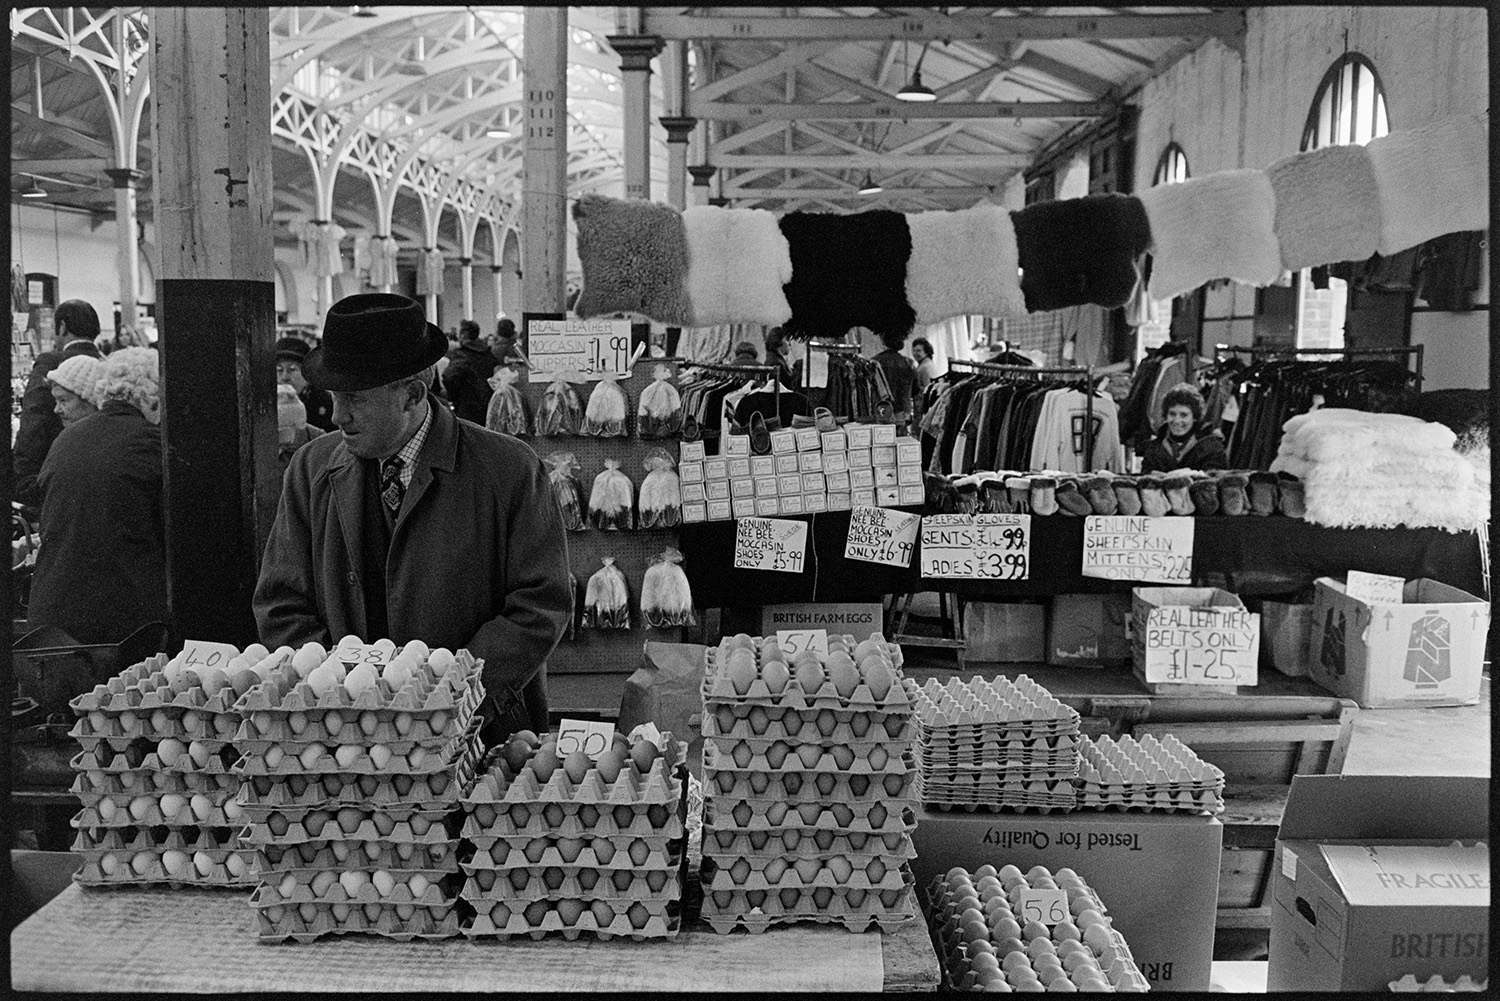 Stalls at Pannier market. Eggs, vegetables, flowers.
[A man selling eggs at a stall in Barnstaple Pannier Market. A stall selling hats, sheepskin gloves and moccasin slippers is visible in the background.]